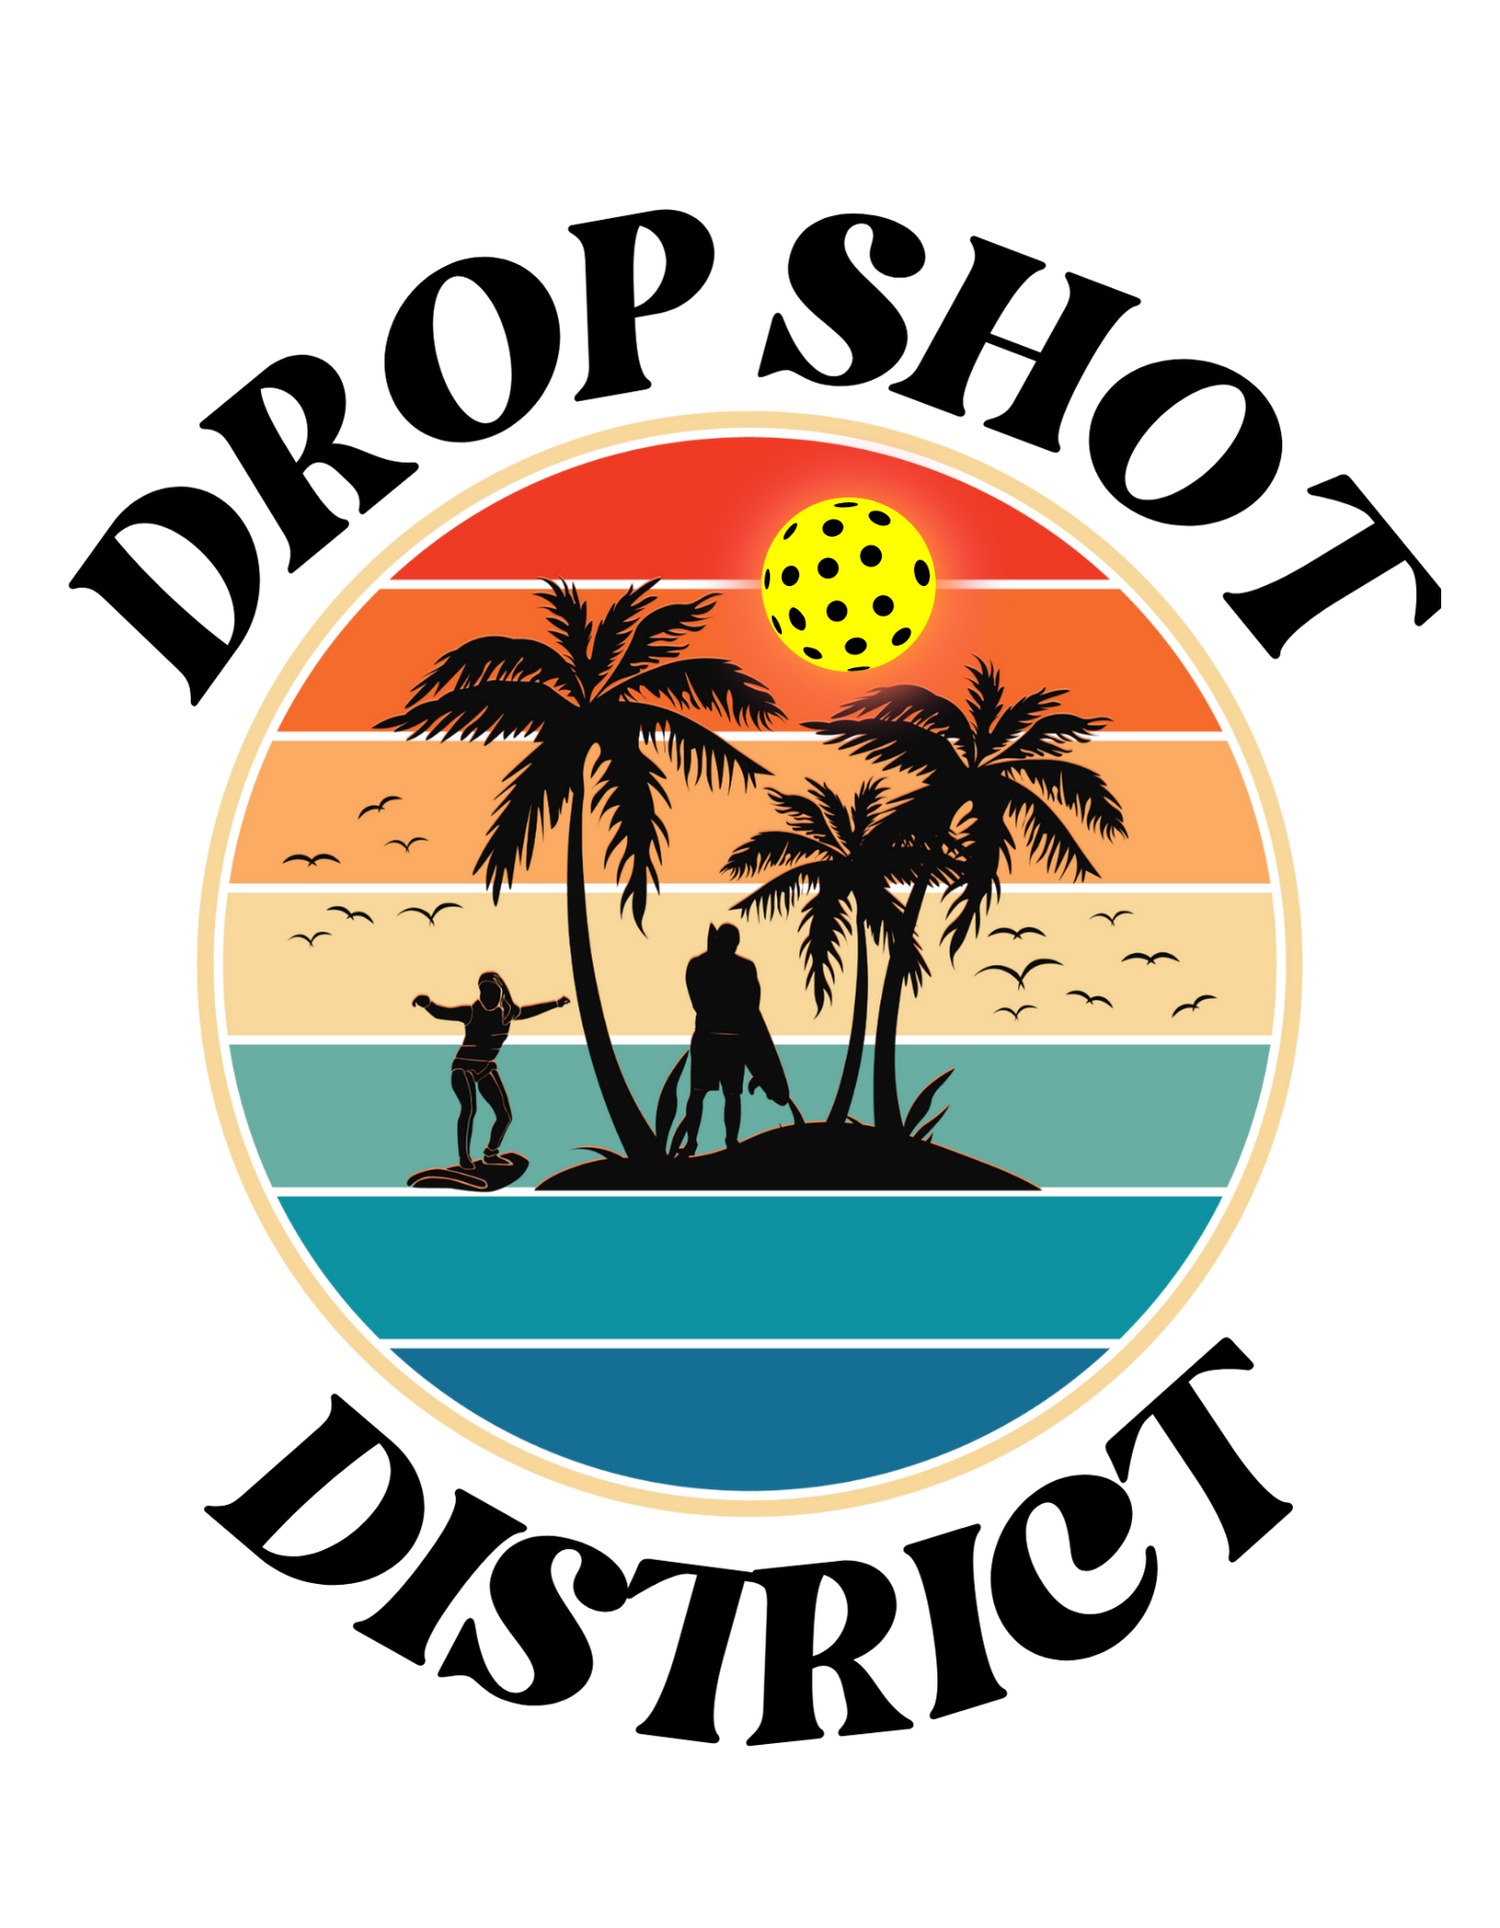 Beachy, fresh, cool drop shot district clothing company pickleball logo, with tropical colors, palm trees, beach scene, and a pickleball as the sun.